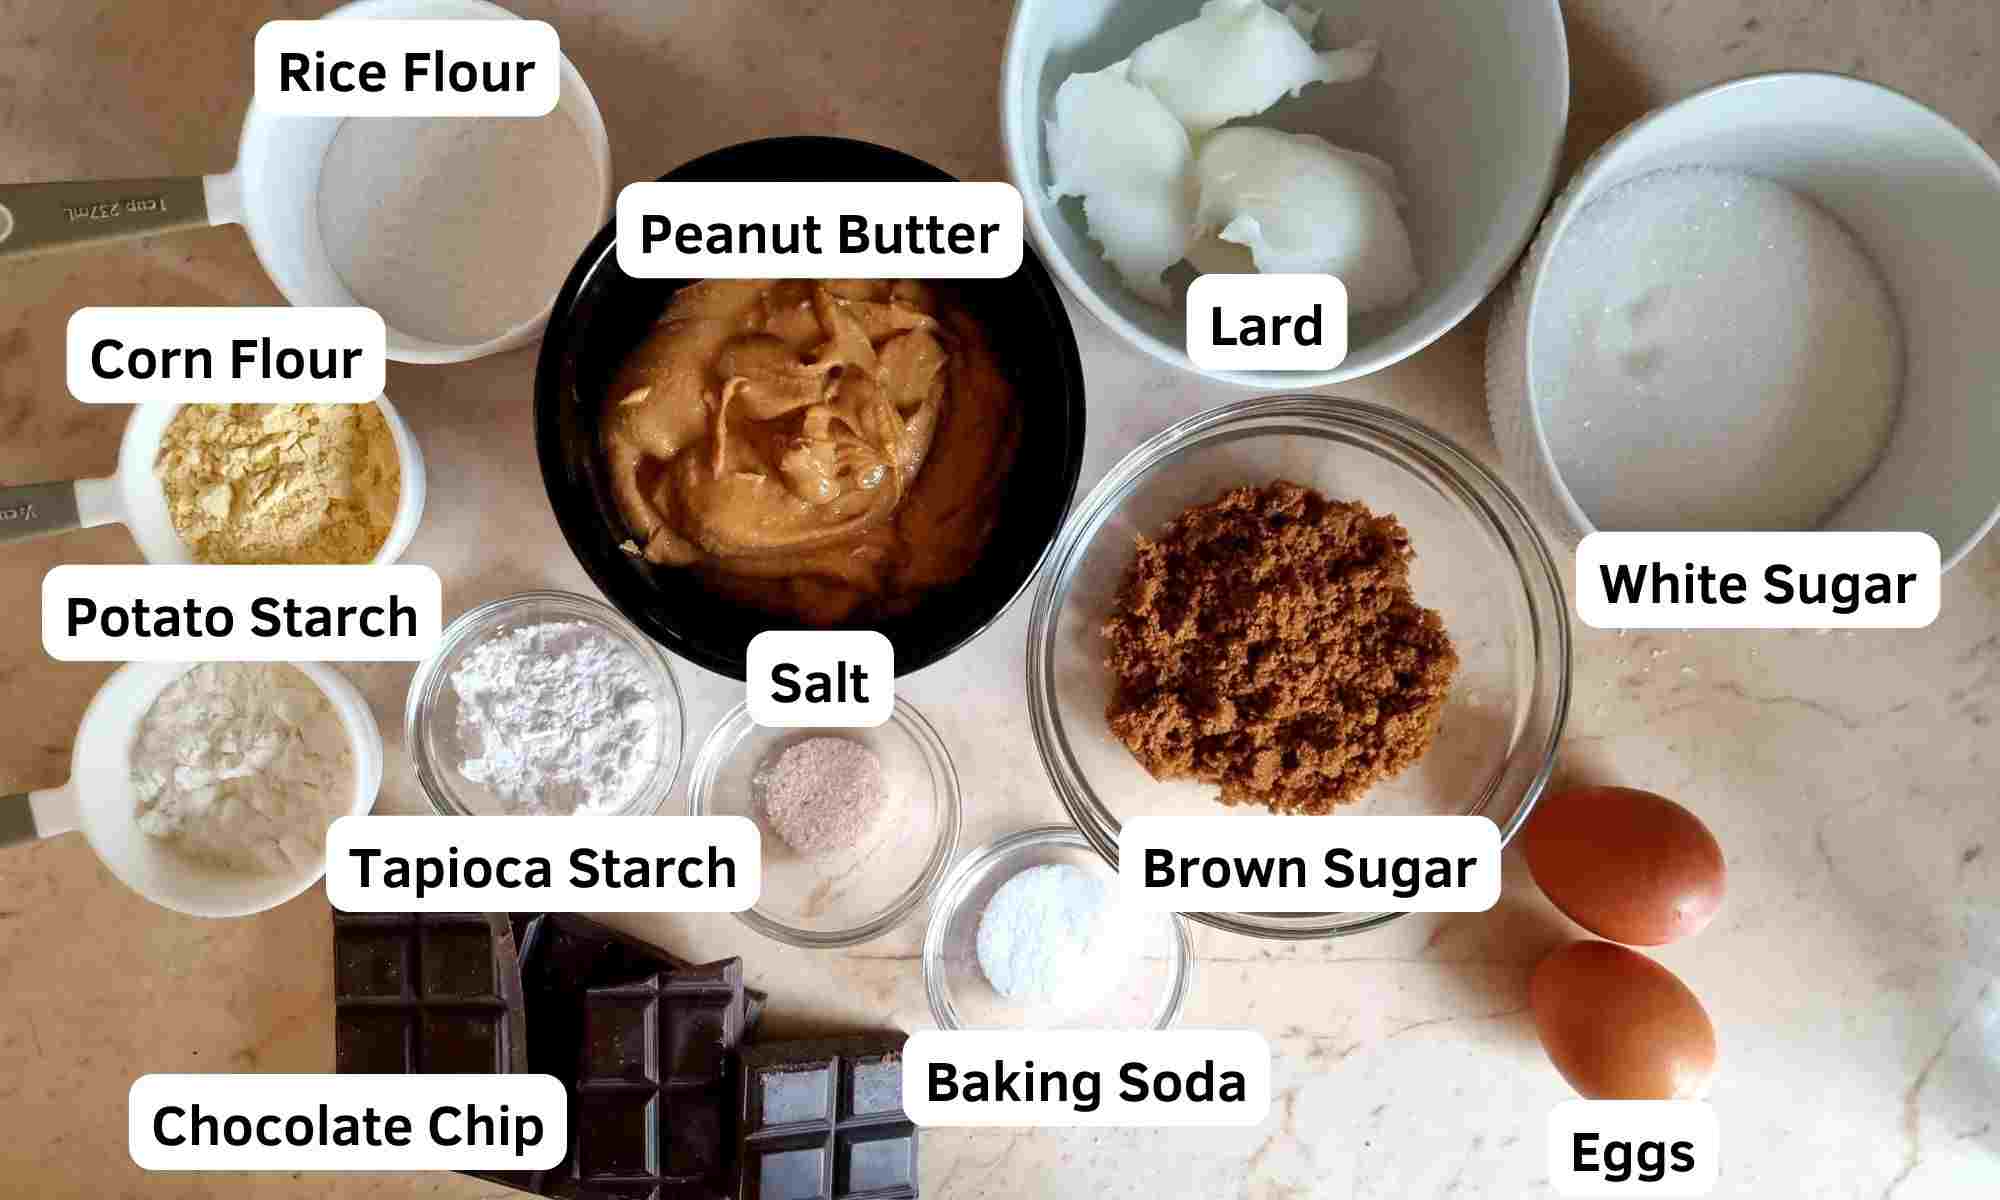 Ingredients for Gluten Free Peanut Butter Chocolate Chip cookies.